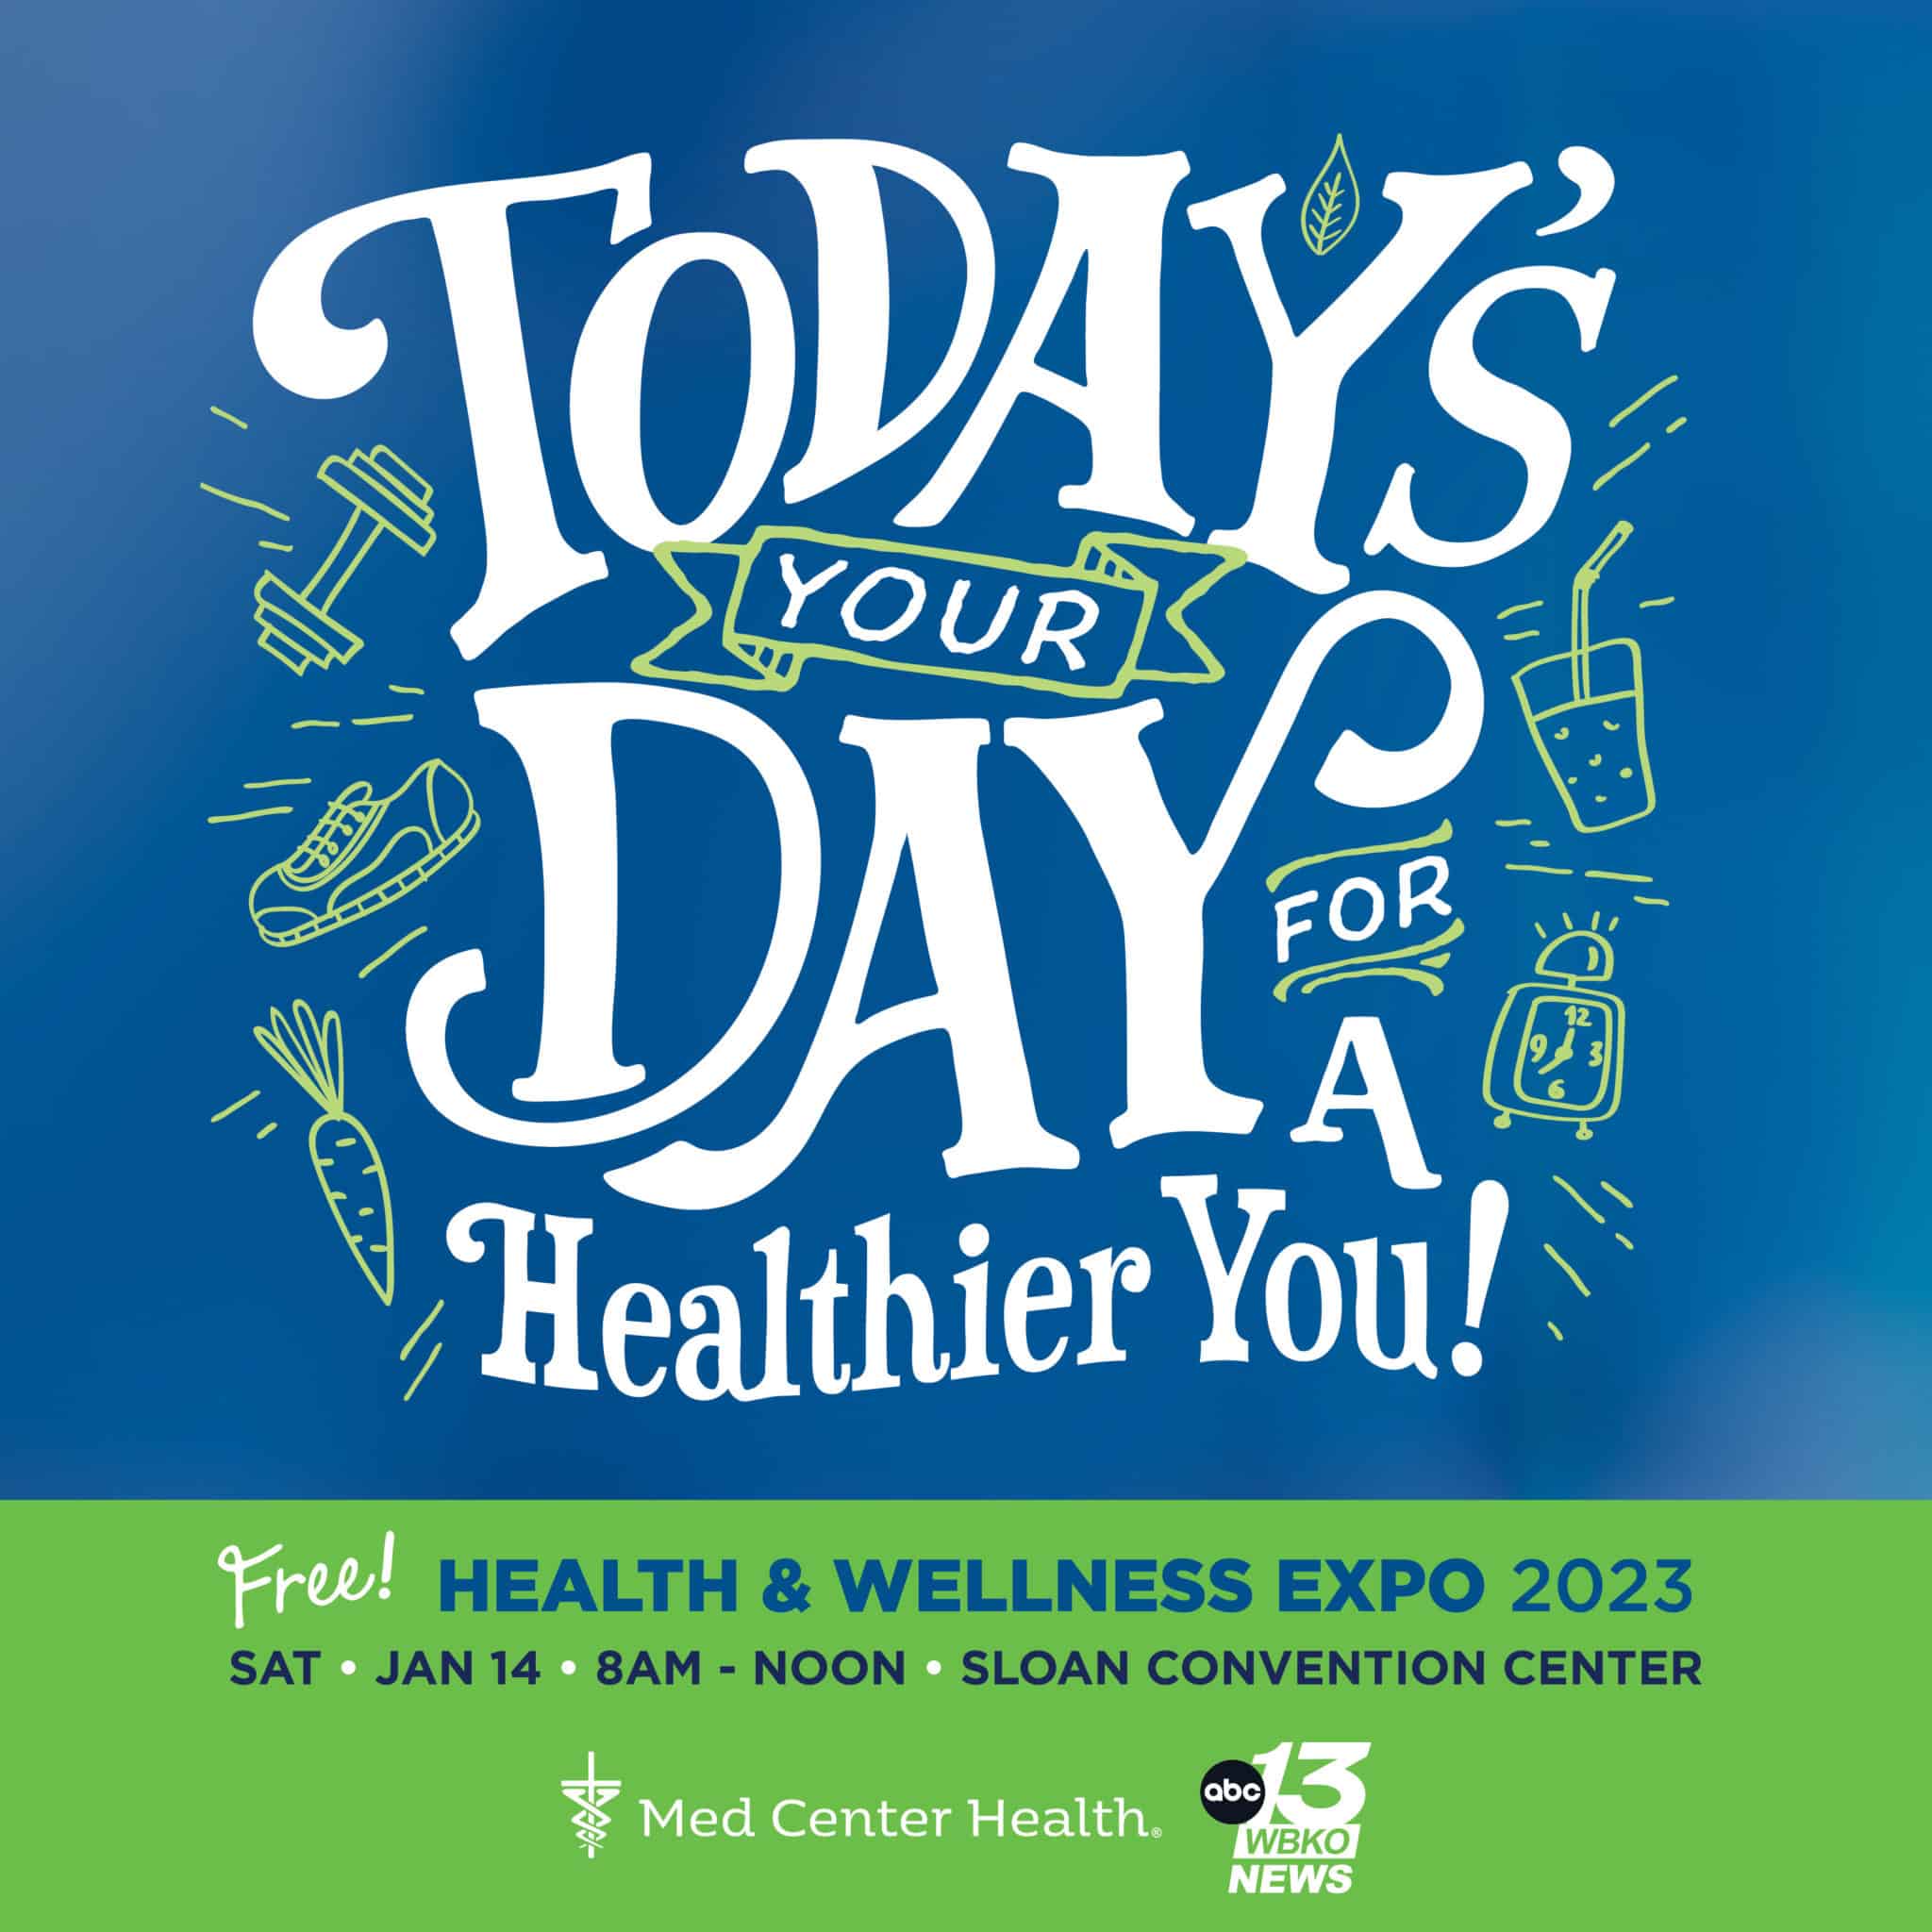 Save the date for the Health & Wellness Expo!